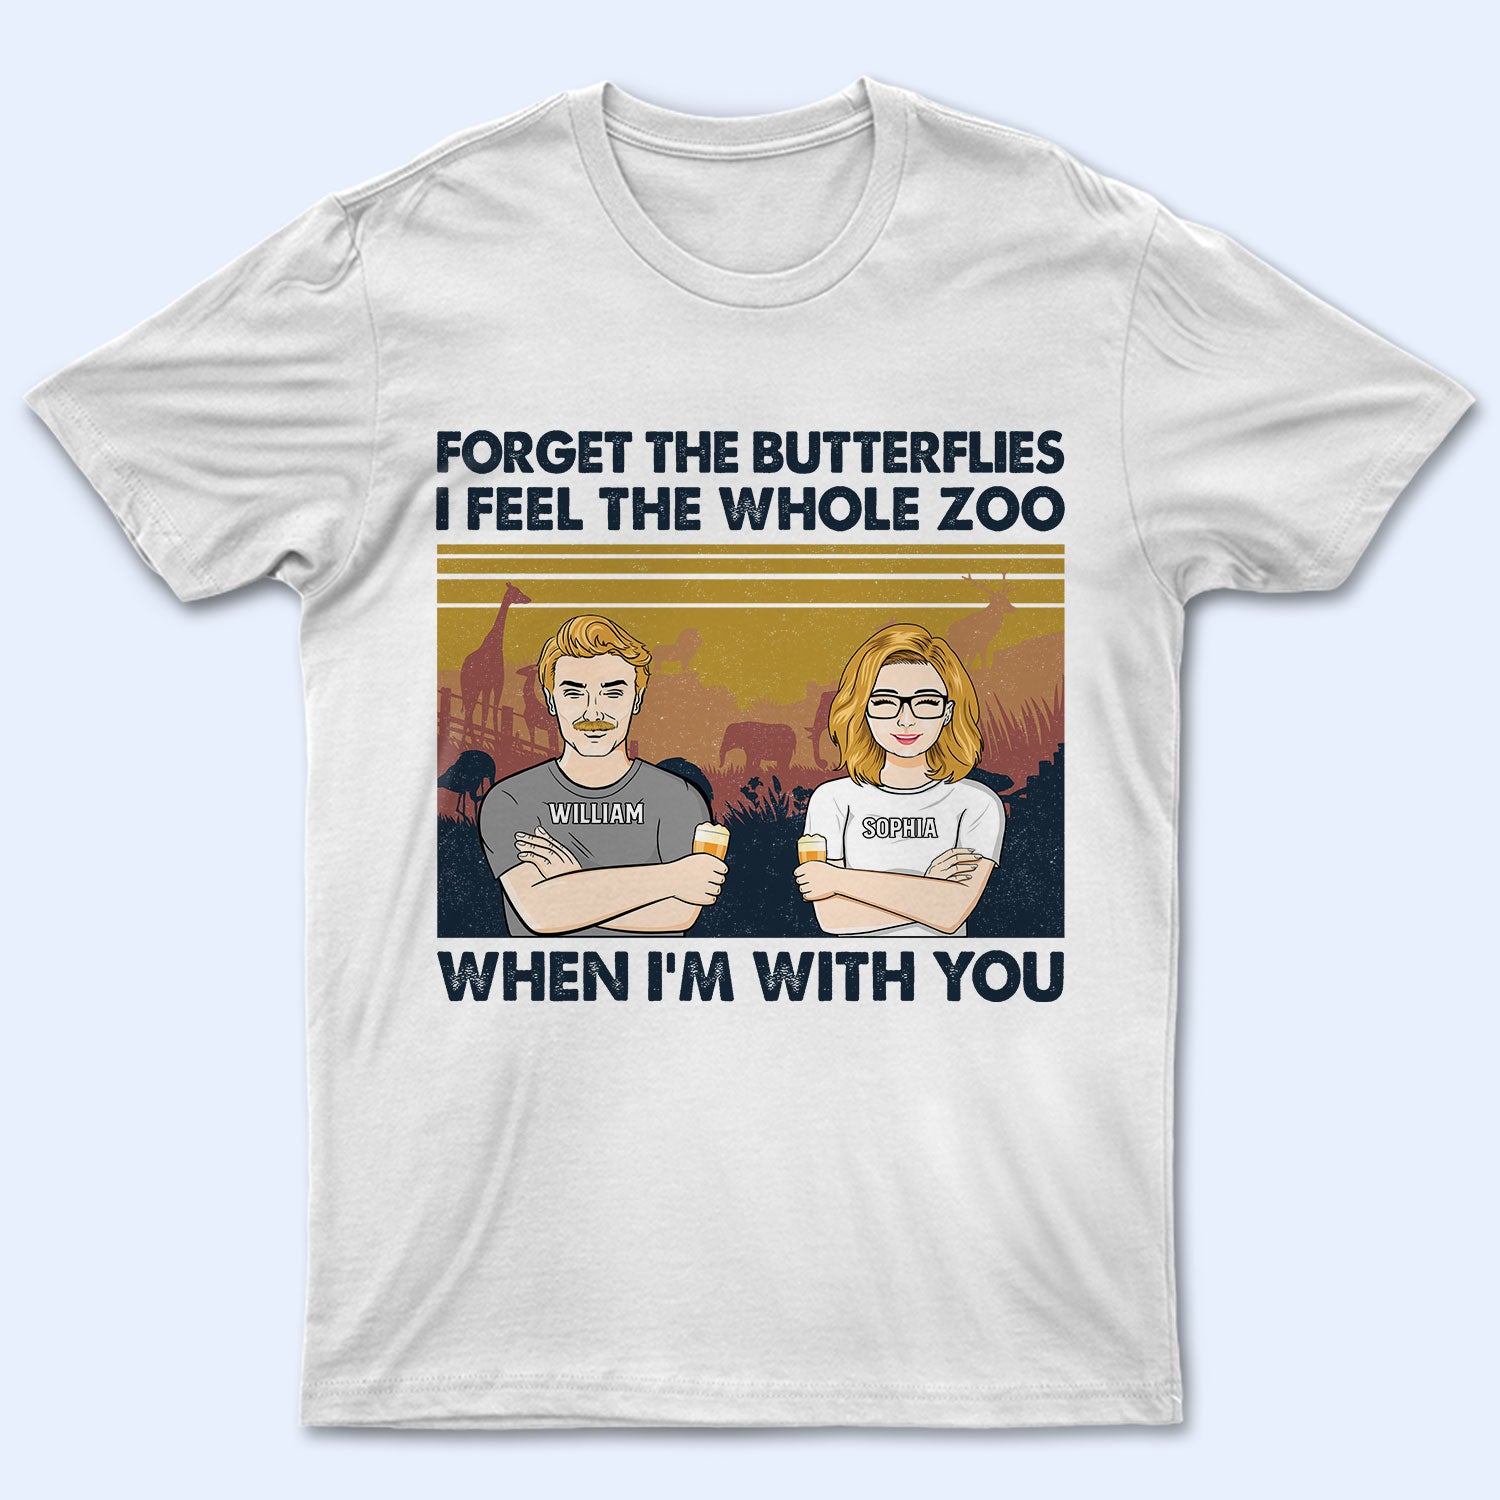 The Whole Zoo - Gift For Couples - Personalized Custom T Shirt